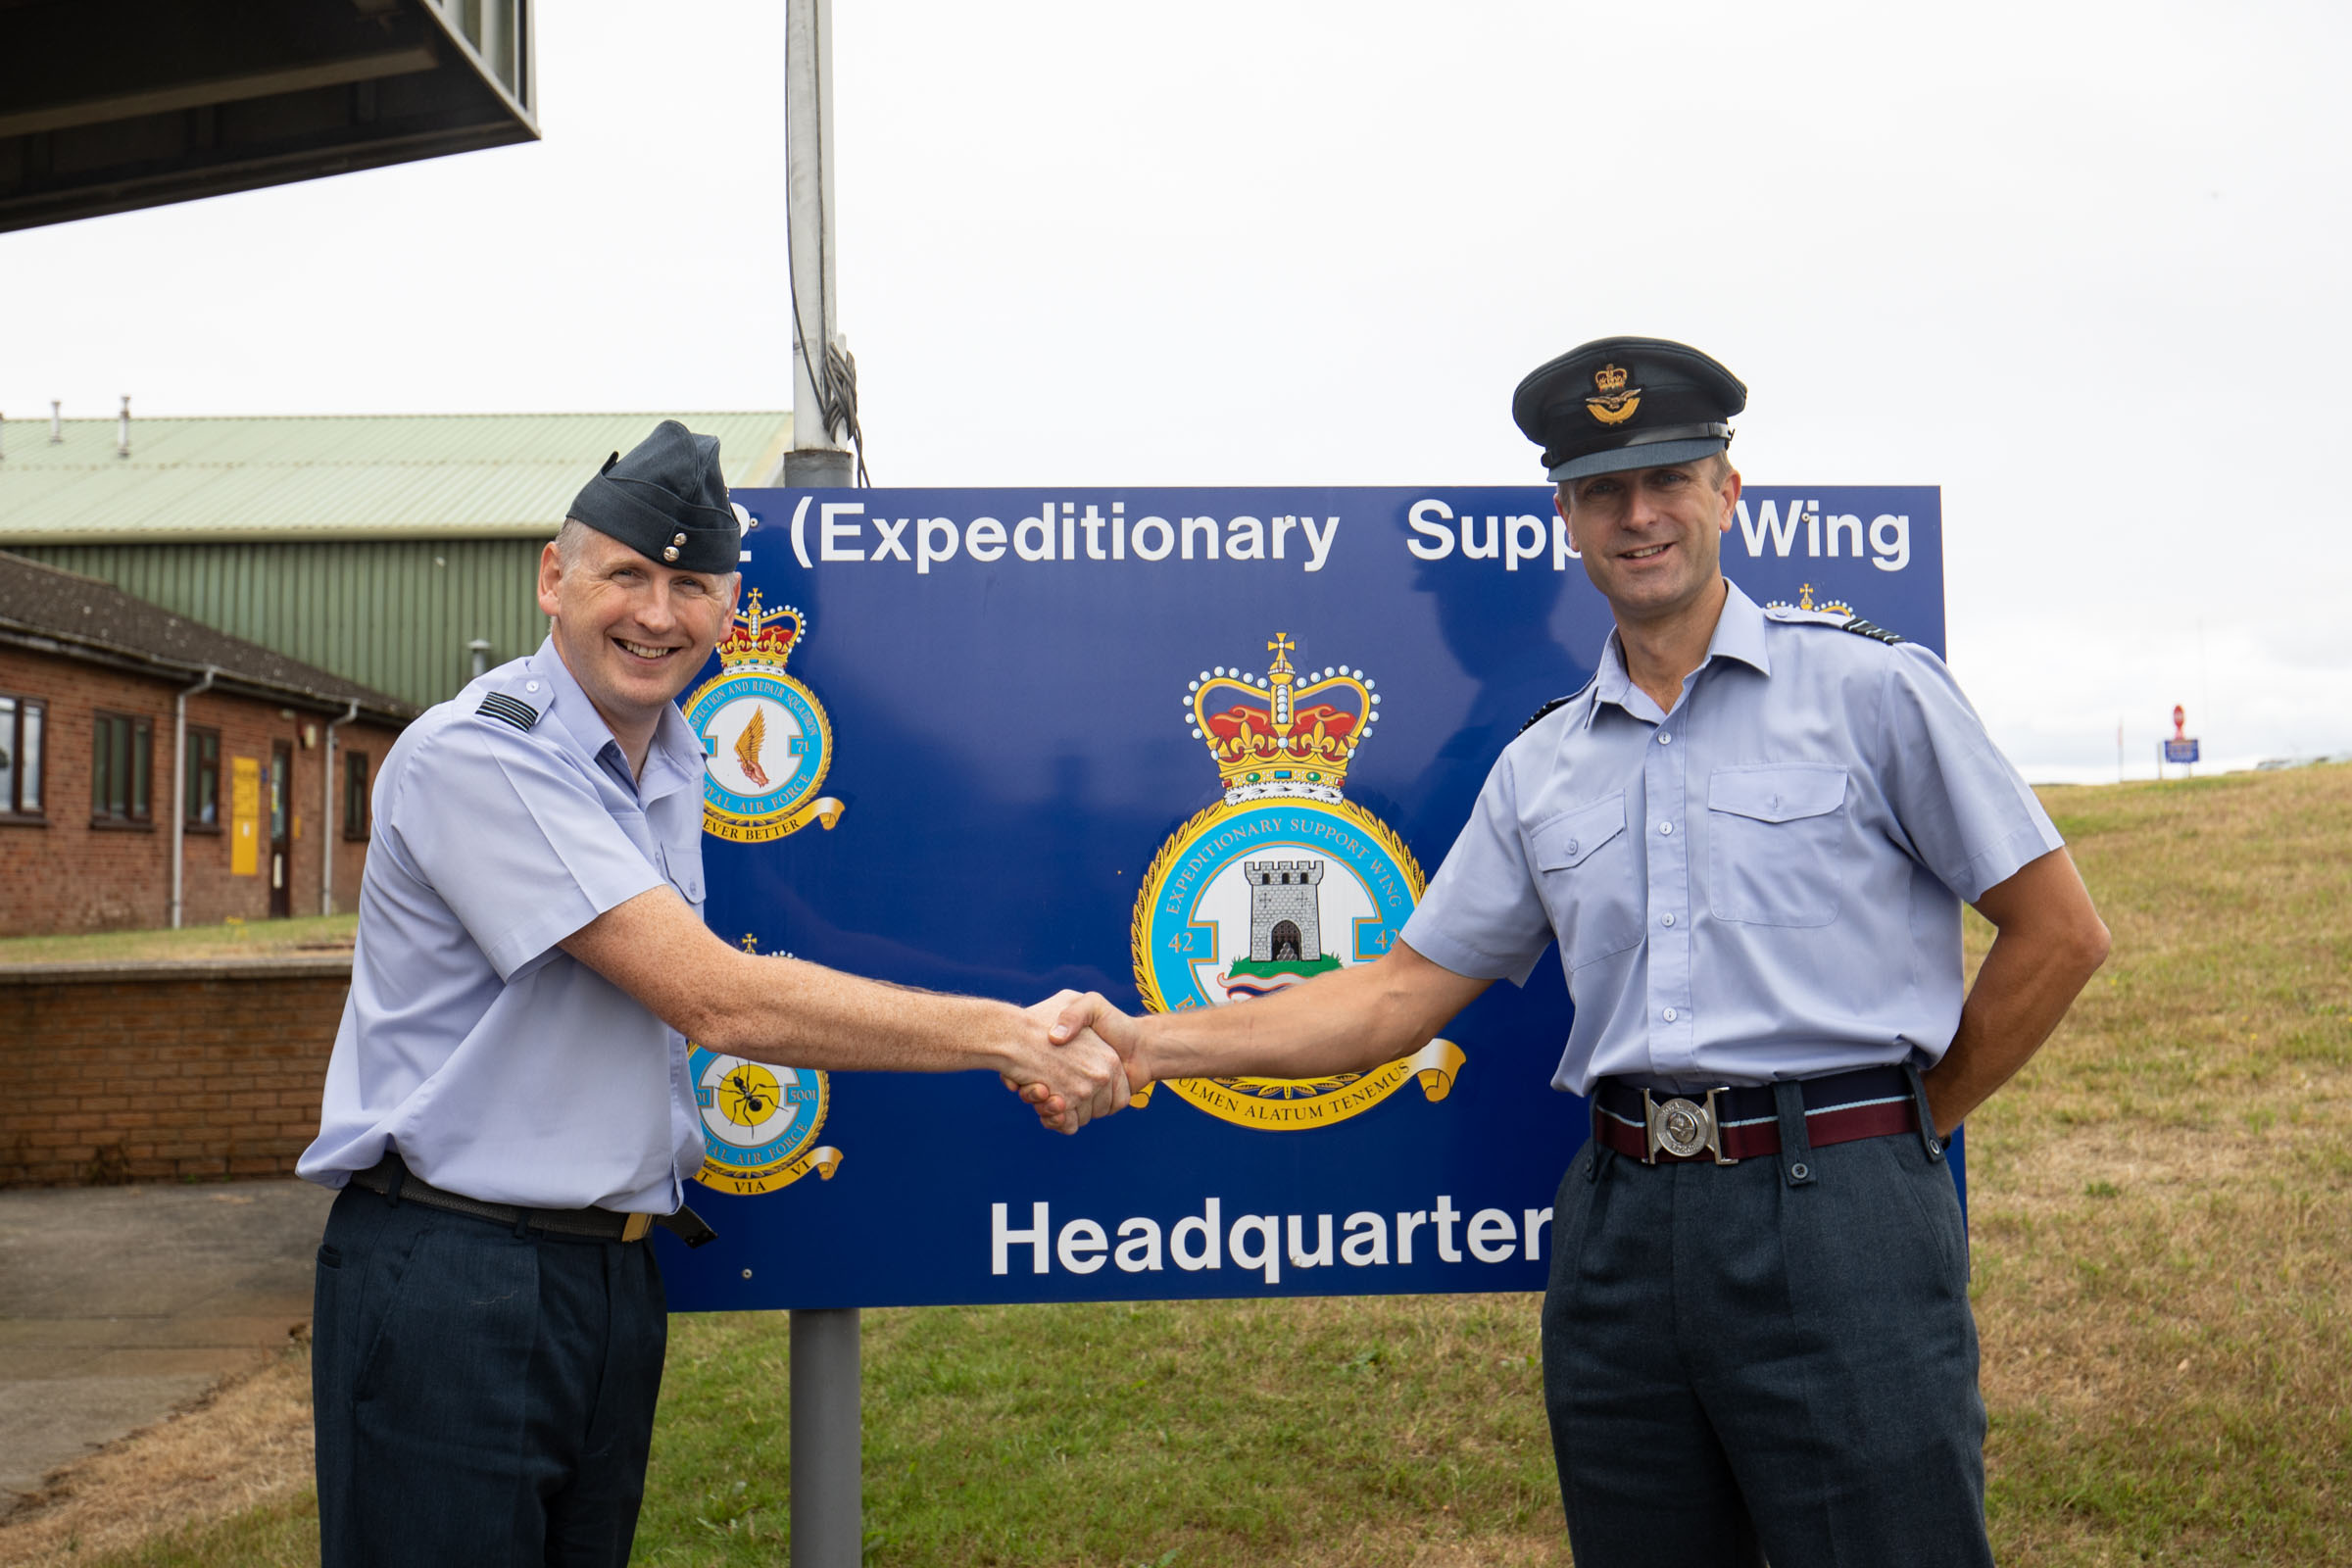 From left to right: Wing Commander Matt Smith and Wing Commander Mike Dutton